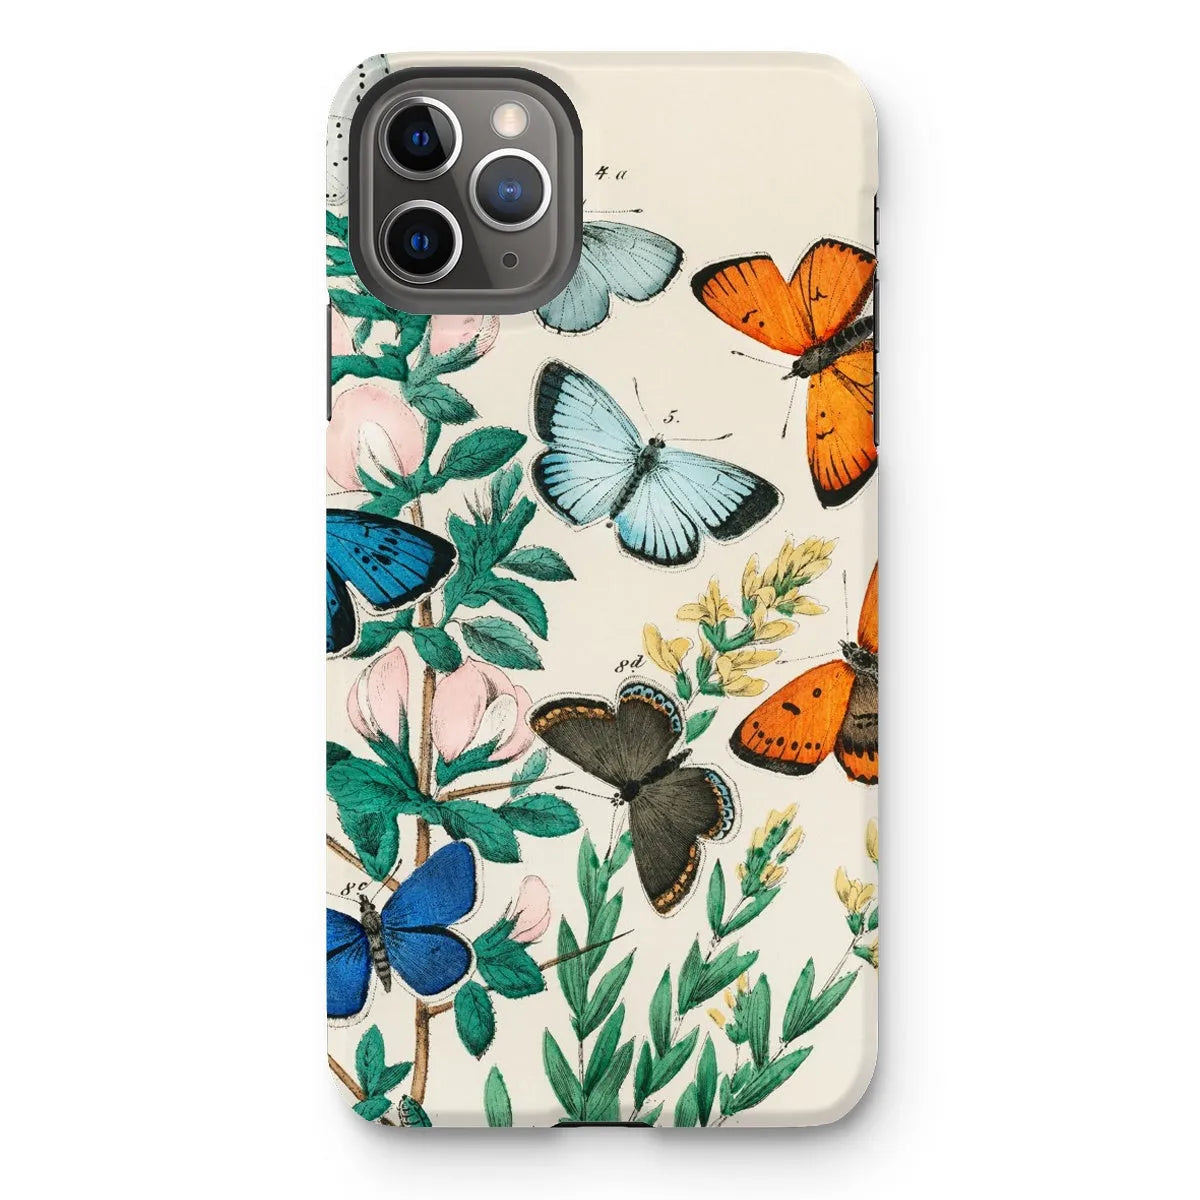 Another Butterfly Aesthetic Art Phone Case - William Forsell Kirby - Iphone 11 Pro Max / Matte - Mobile Phone Cases